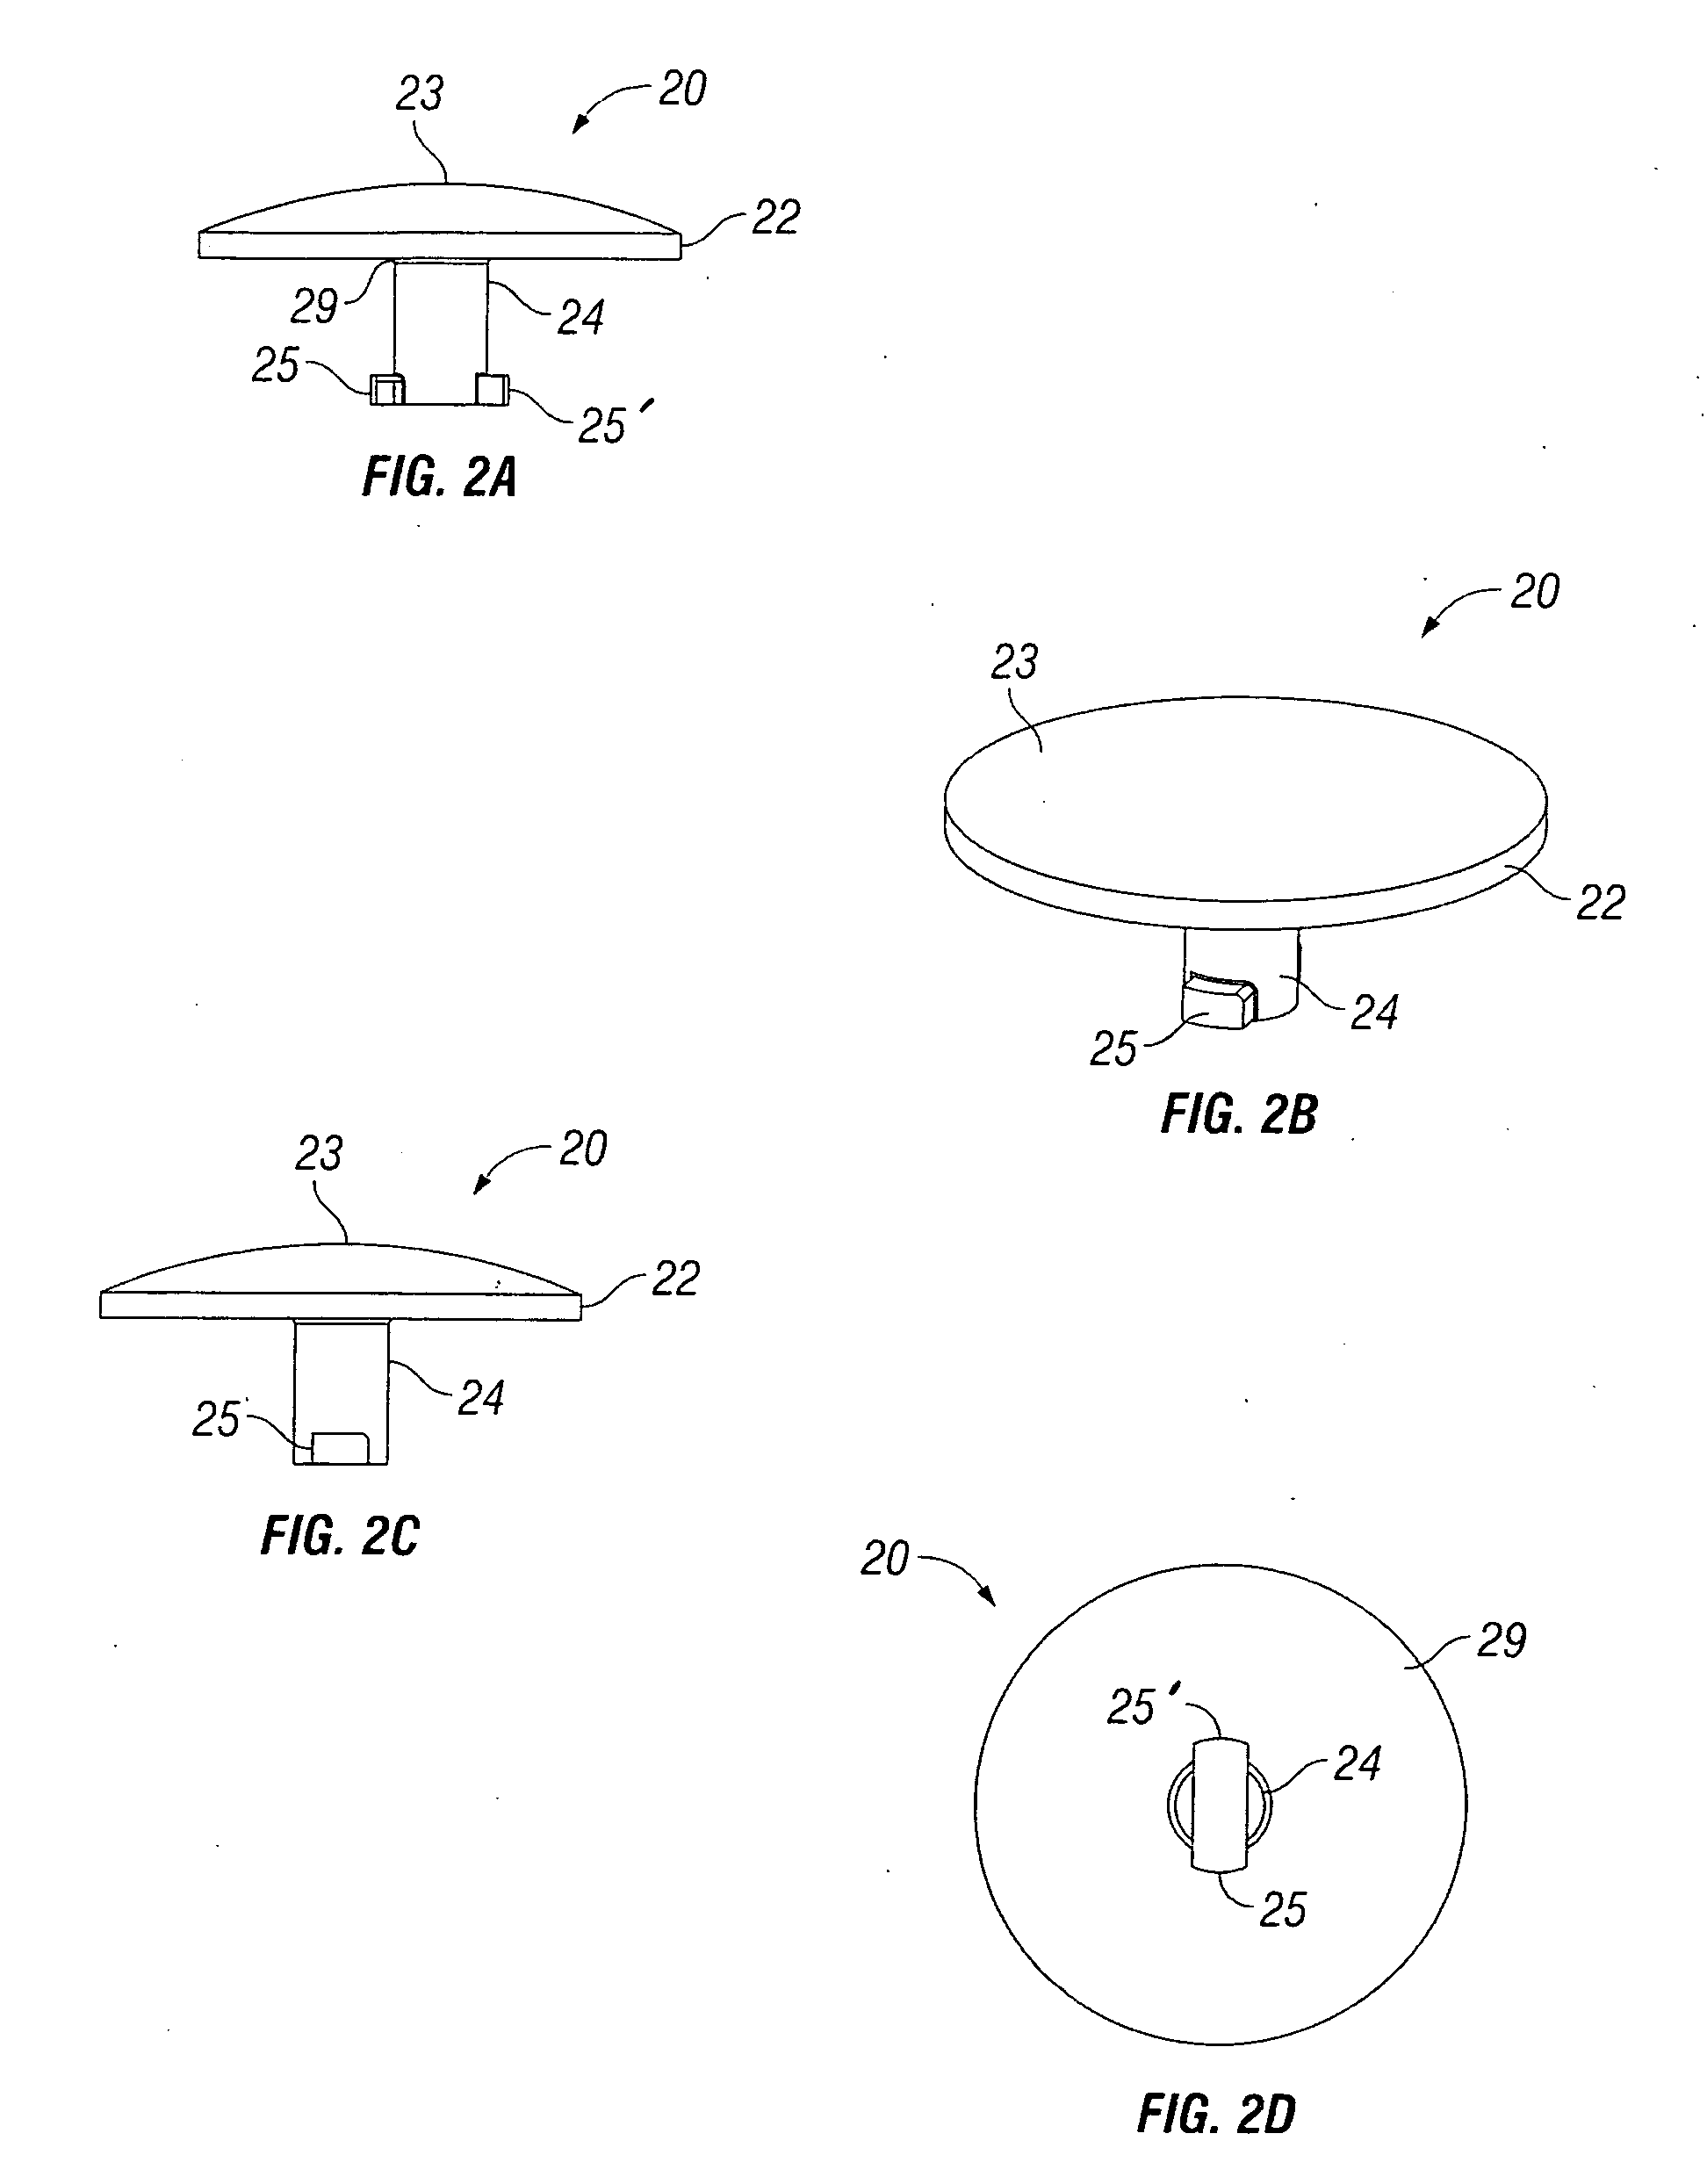 Apparatus and method for securely yet removably attaching ornaments to shoes, clothing, pet collars and the like